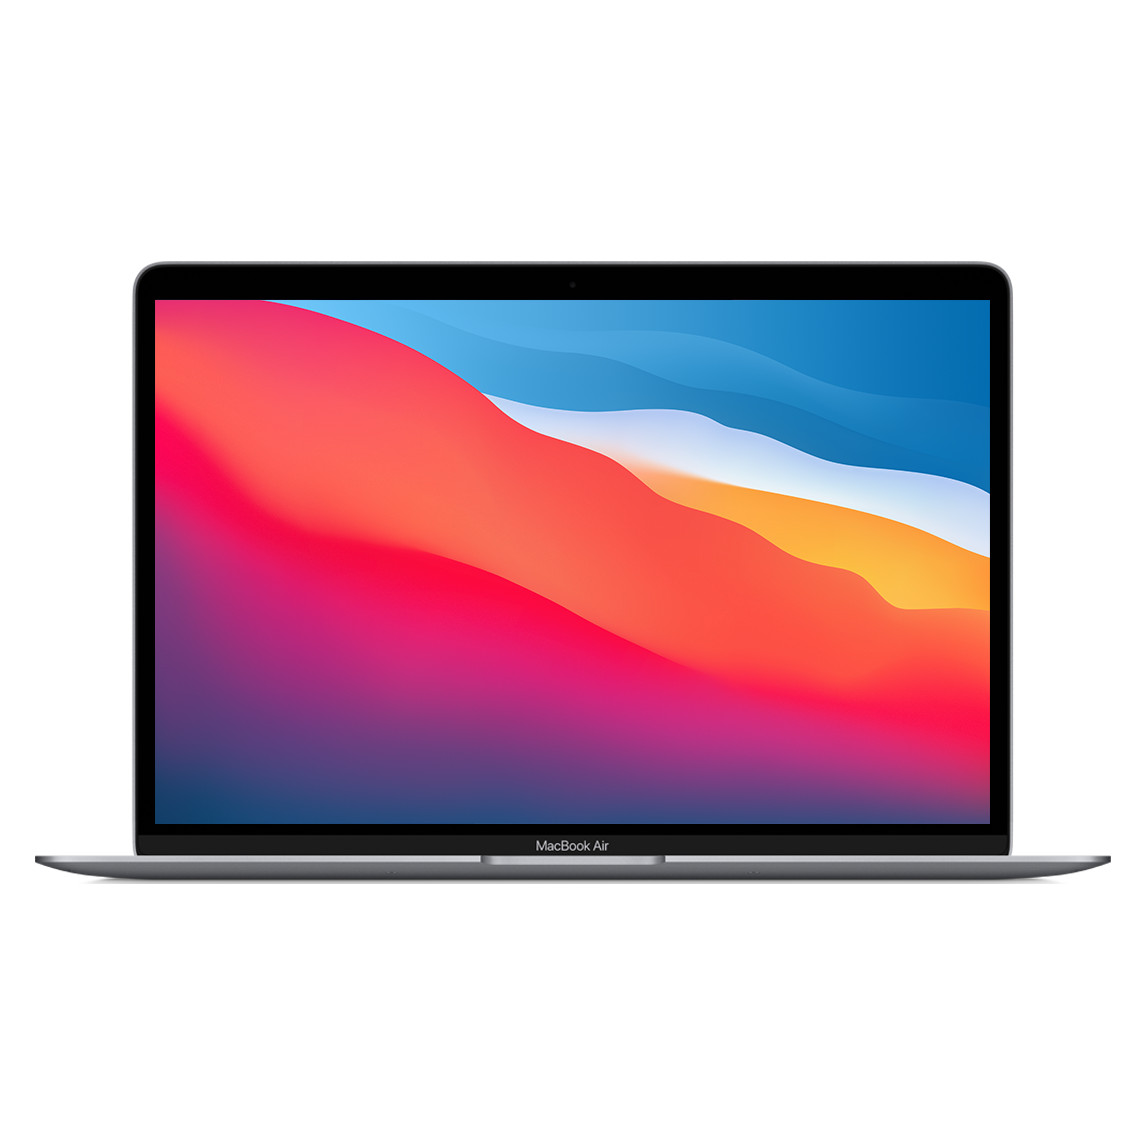 13.3-inch MacBook Air, Gray, open, thin bezel, FaceTime HD camera, curved edges